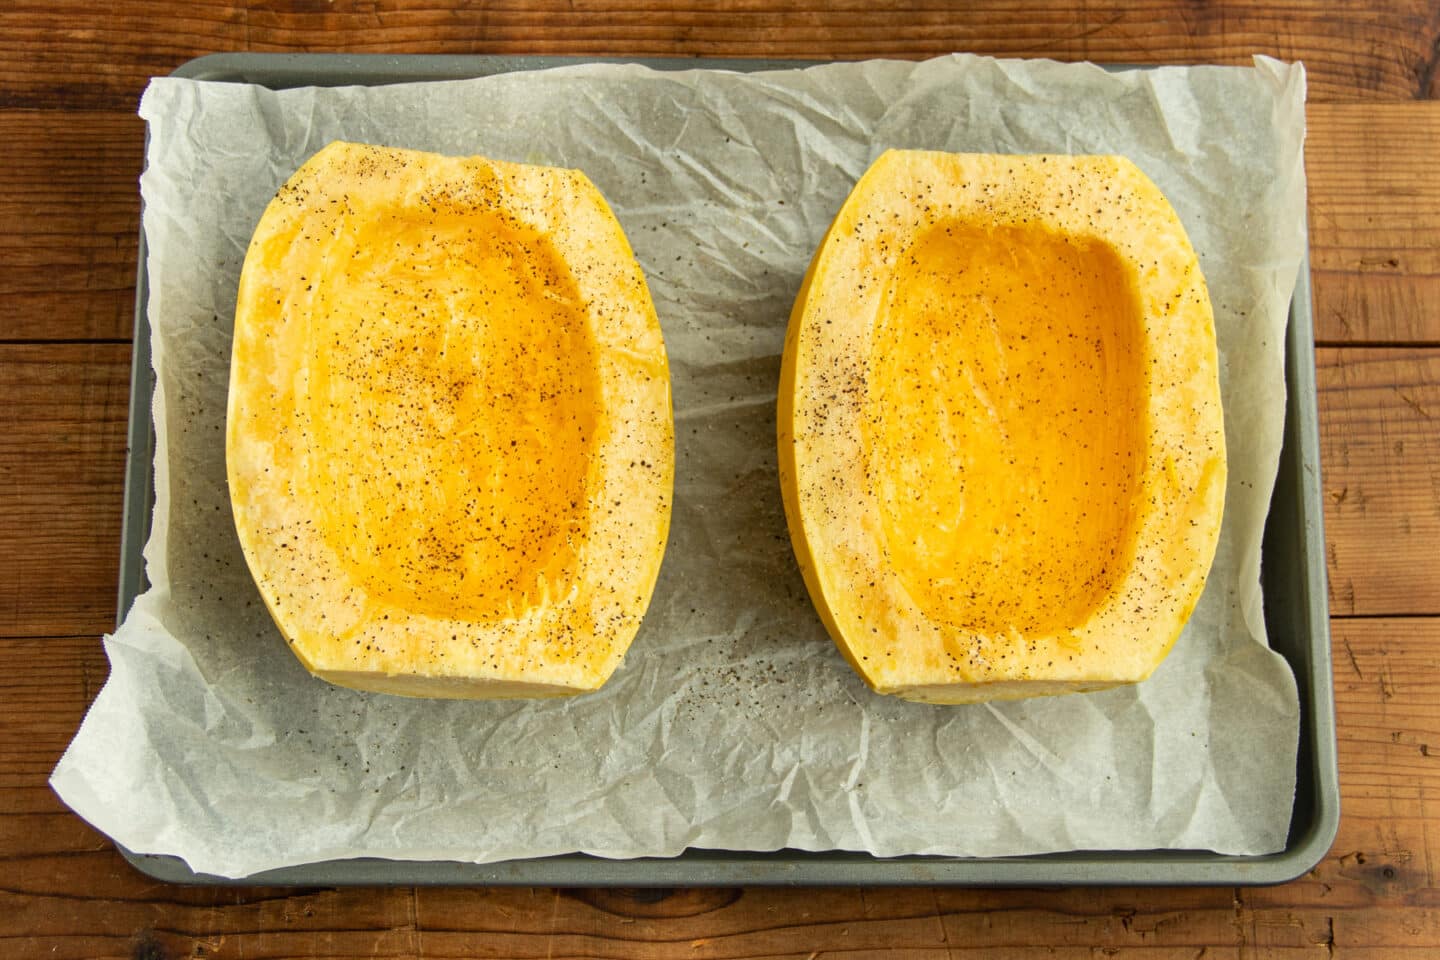 This is a picture of the two halves of the squash with oil, salt and pepper.